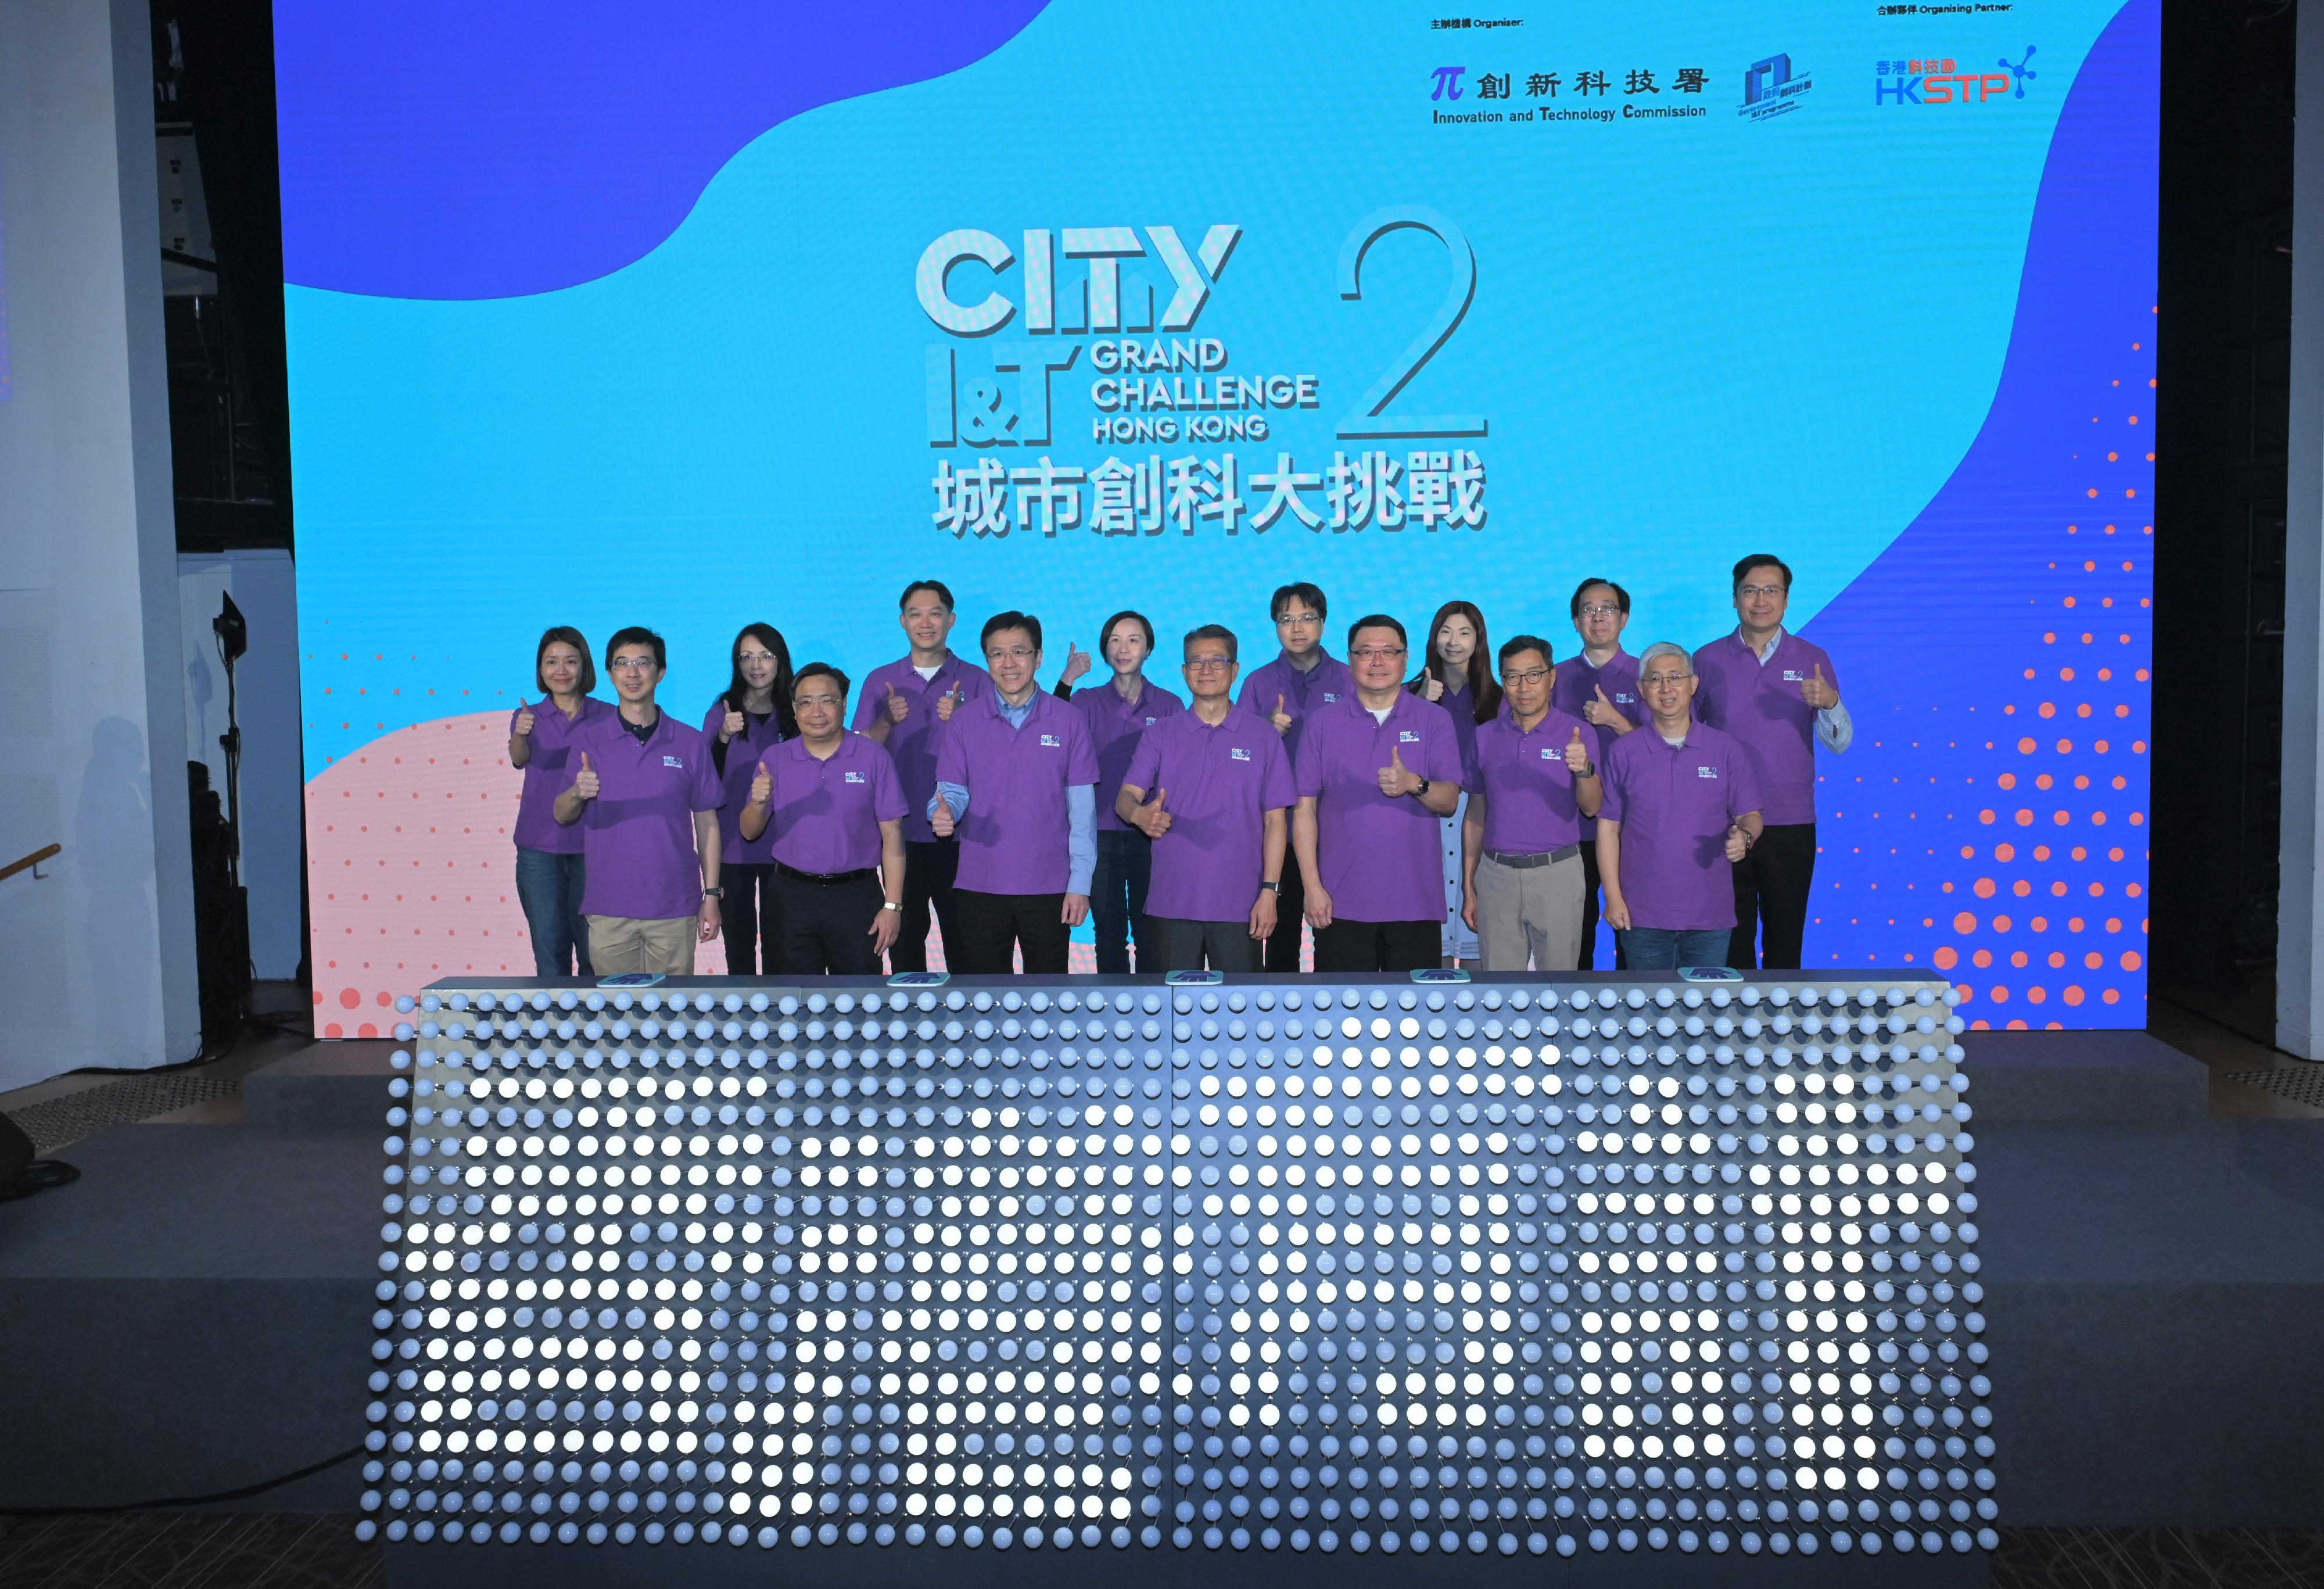 The Financial Secretary, Mr Paul Chan, attended the launching ceremony of the second City I&T Grand Challenge today (March 16). Photo shows (front row, from second left) the Commissioner for Innovation and Technology, Mr Ivan Lee; the Secretary for Innovation, Technology and Industry, Professor Sun Dong; Mr Chan; the Chairman of the Hong Kong Science and Technology Parks Corporation (HKSTPC), Dr Sunny Chai; and the Chief Executive Officer of the HKSTPC, Mr Albert Wong, with members of the advisory committee of the City I&T Grand Challenge.